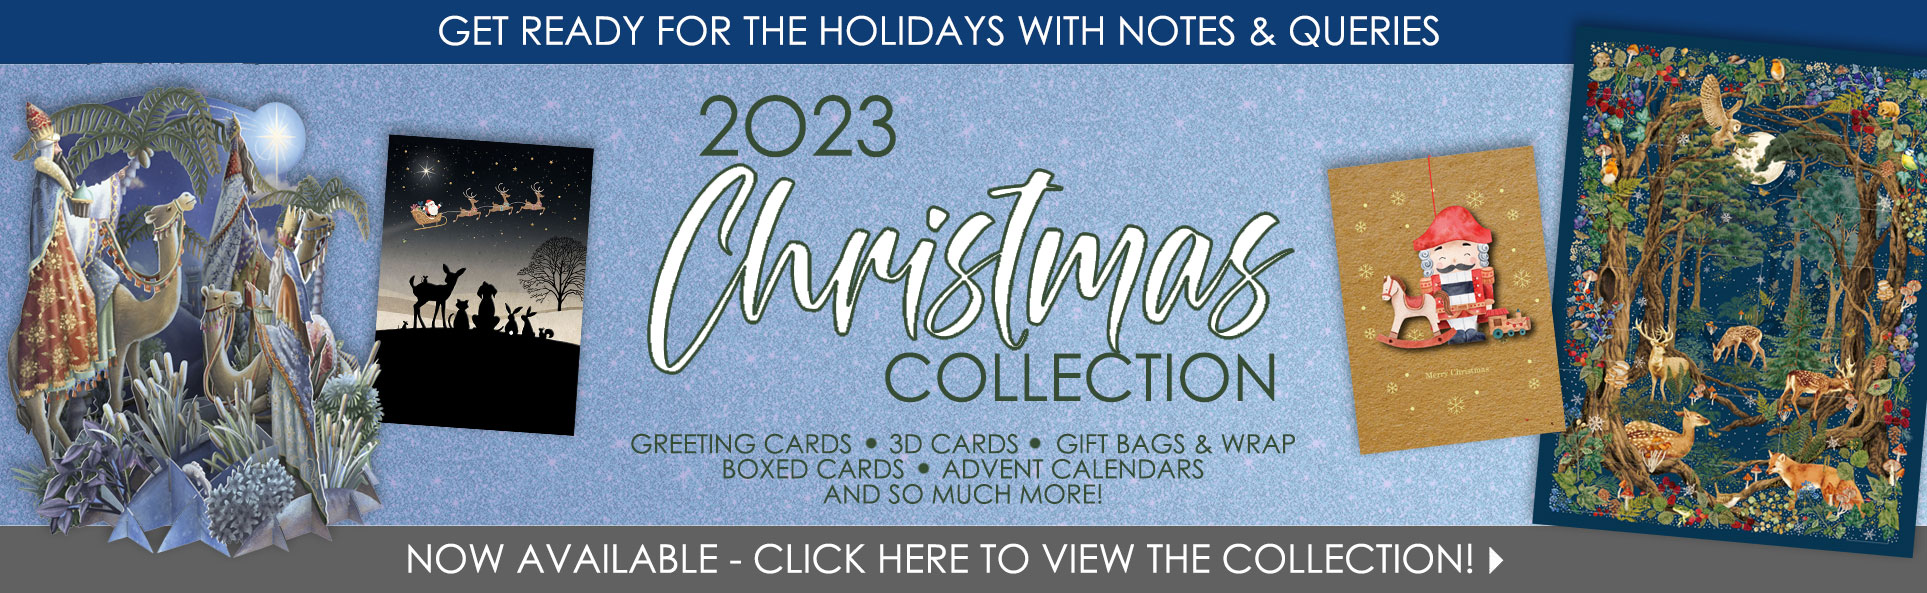 Notes & Queries has launched our 2023 Holiday Collection!